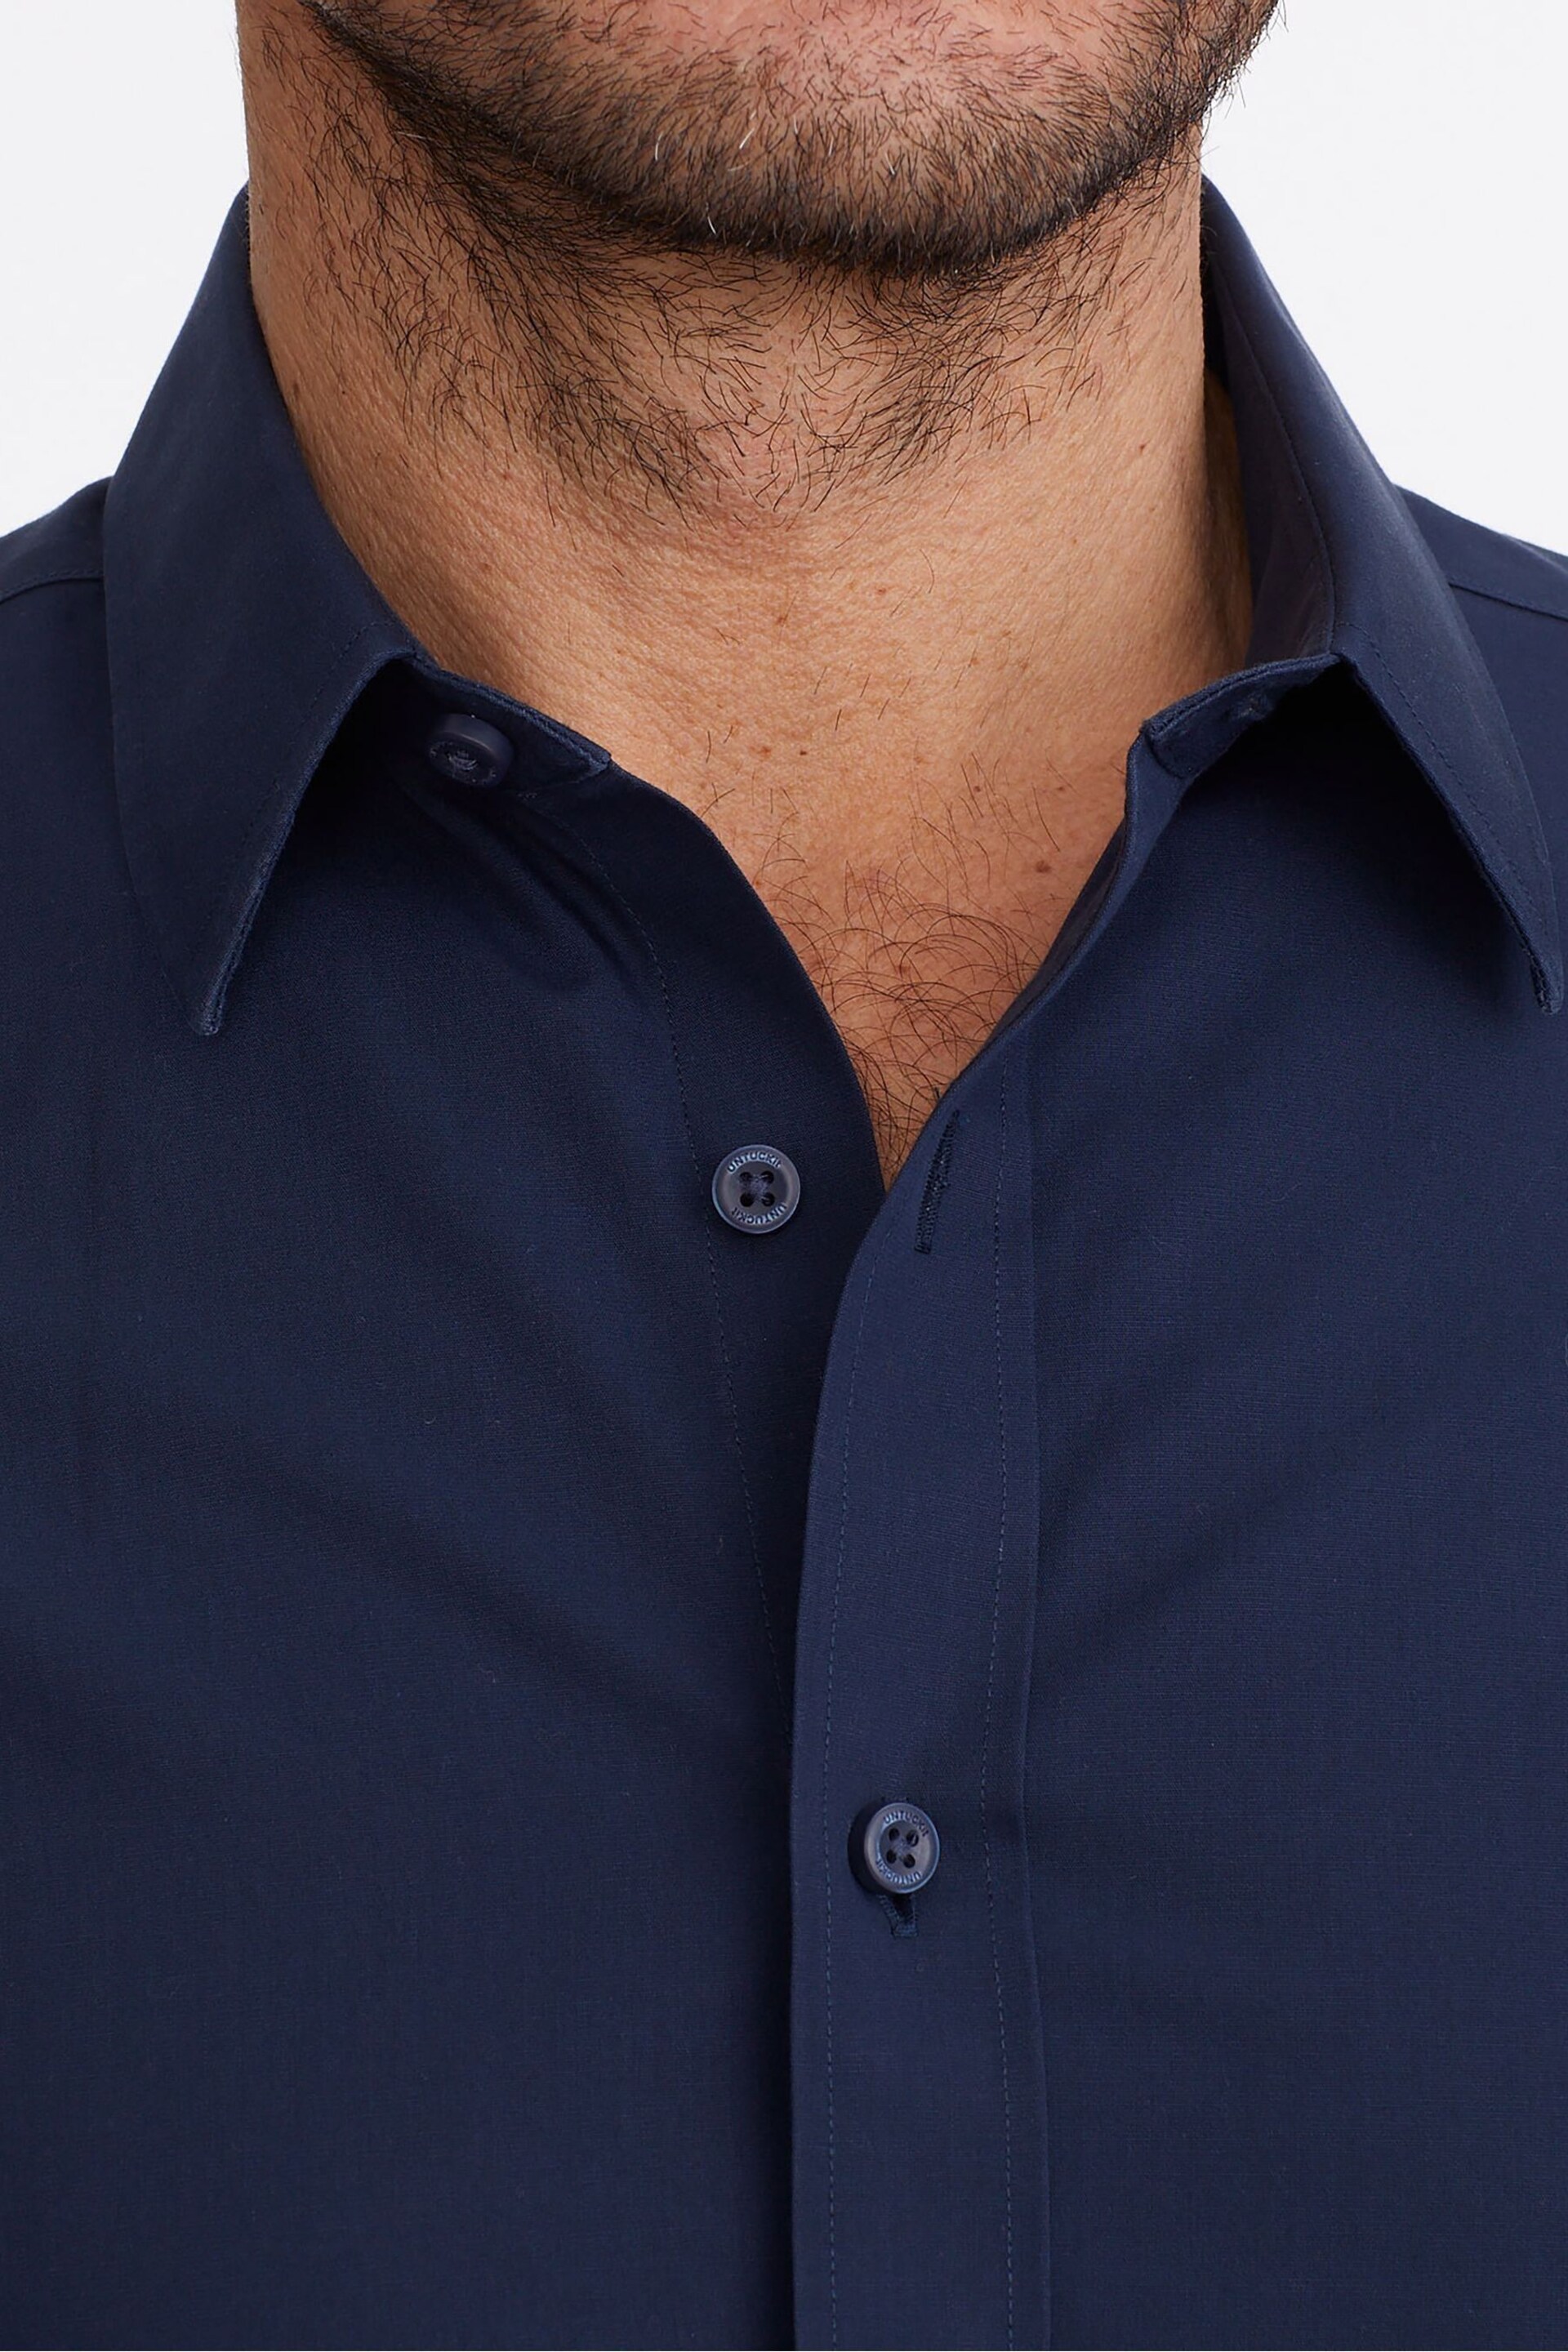 UNTUCKit Dark Blue Wrinkle-Free Relaxed Fit Castello Shirt - Image 3 of 6